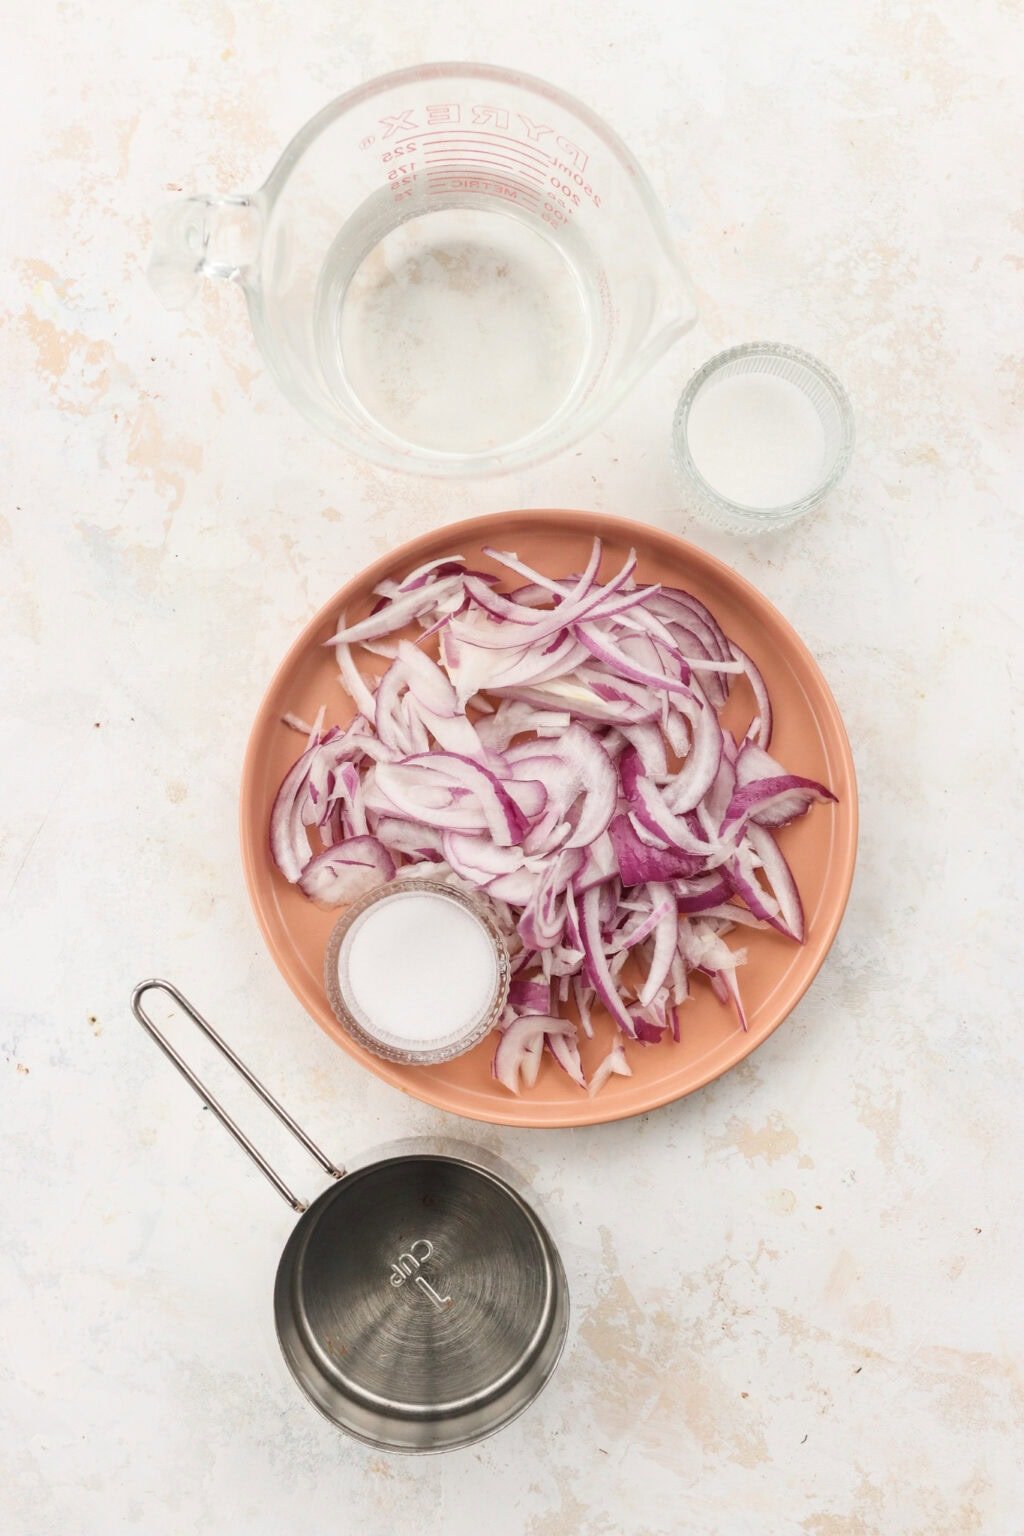 Ingredients for quick pickled red onions, including red onions, salt, sugar, vinegar, and hot water